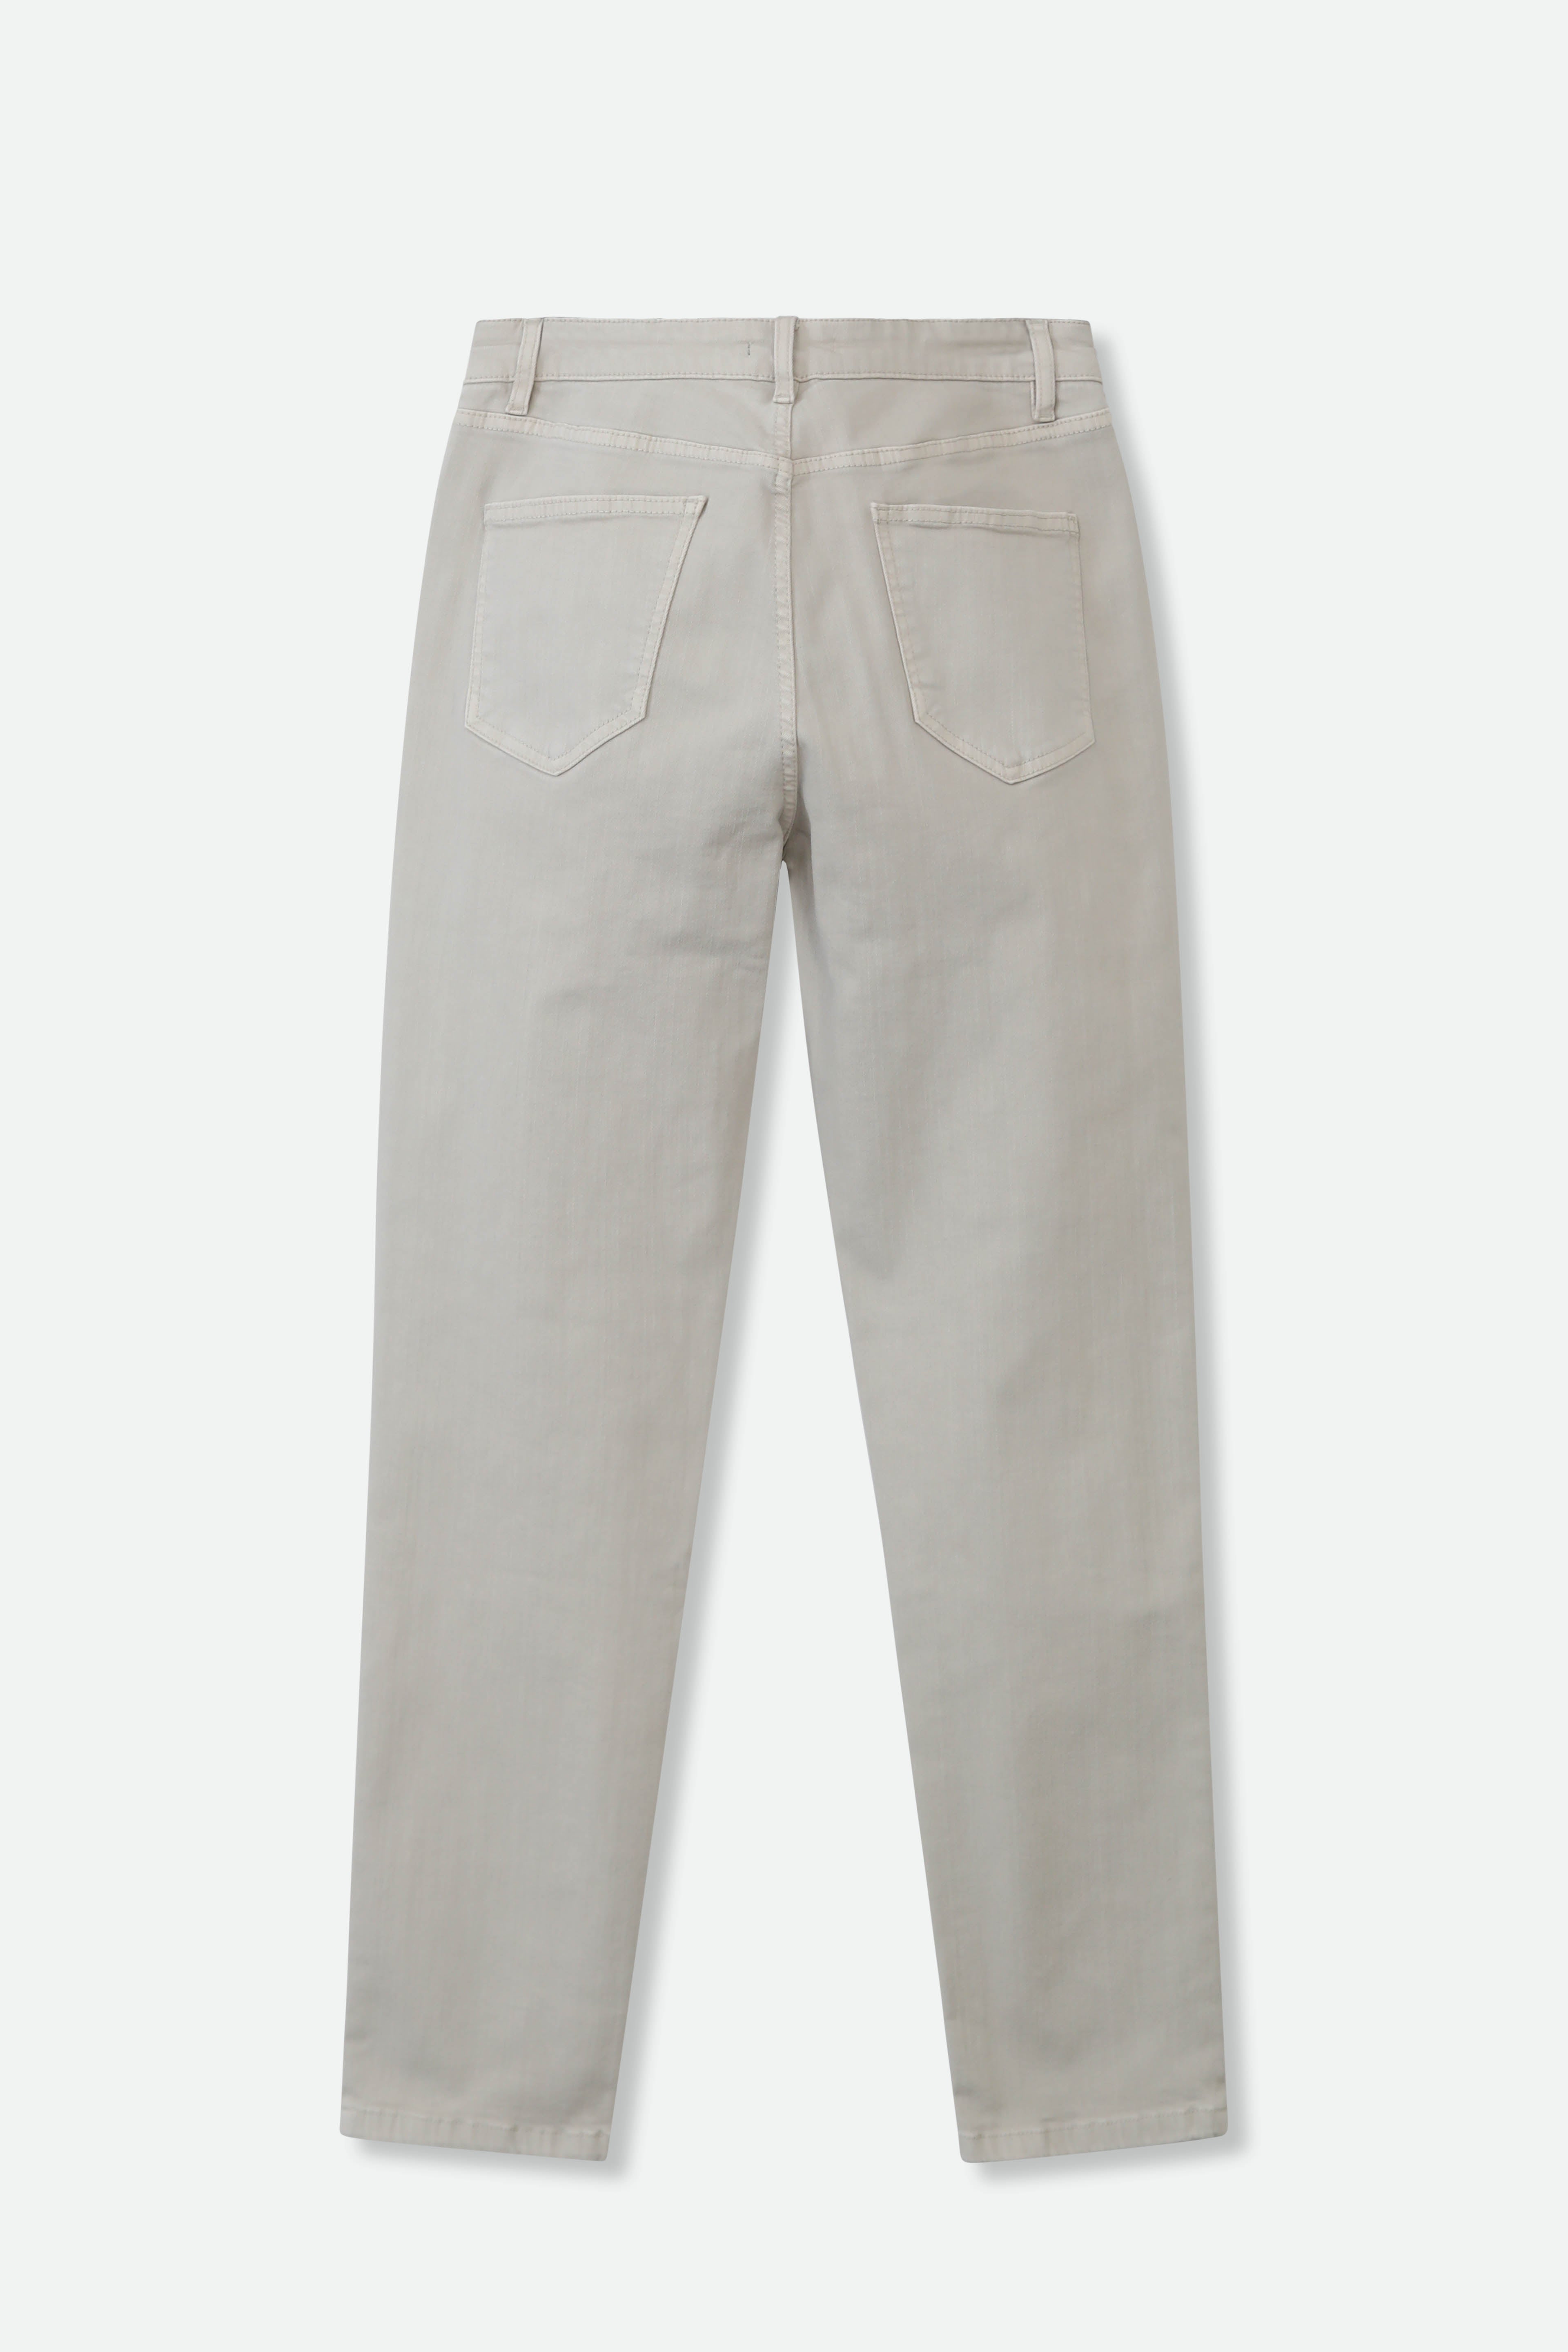 FIVE POCKET CROPPED DENIM PACE PANT IN SAND - Jarbo